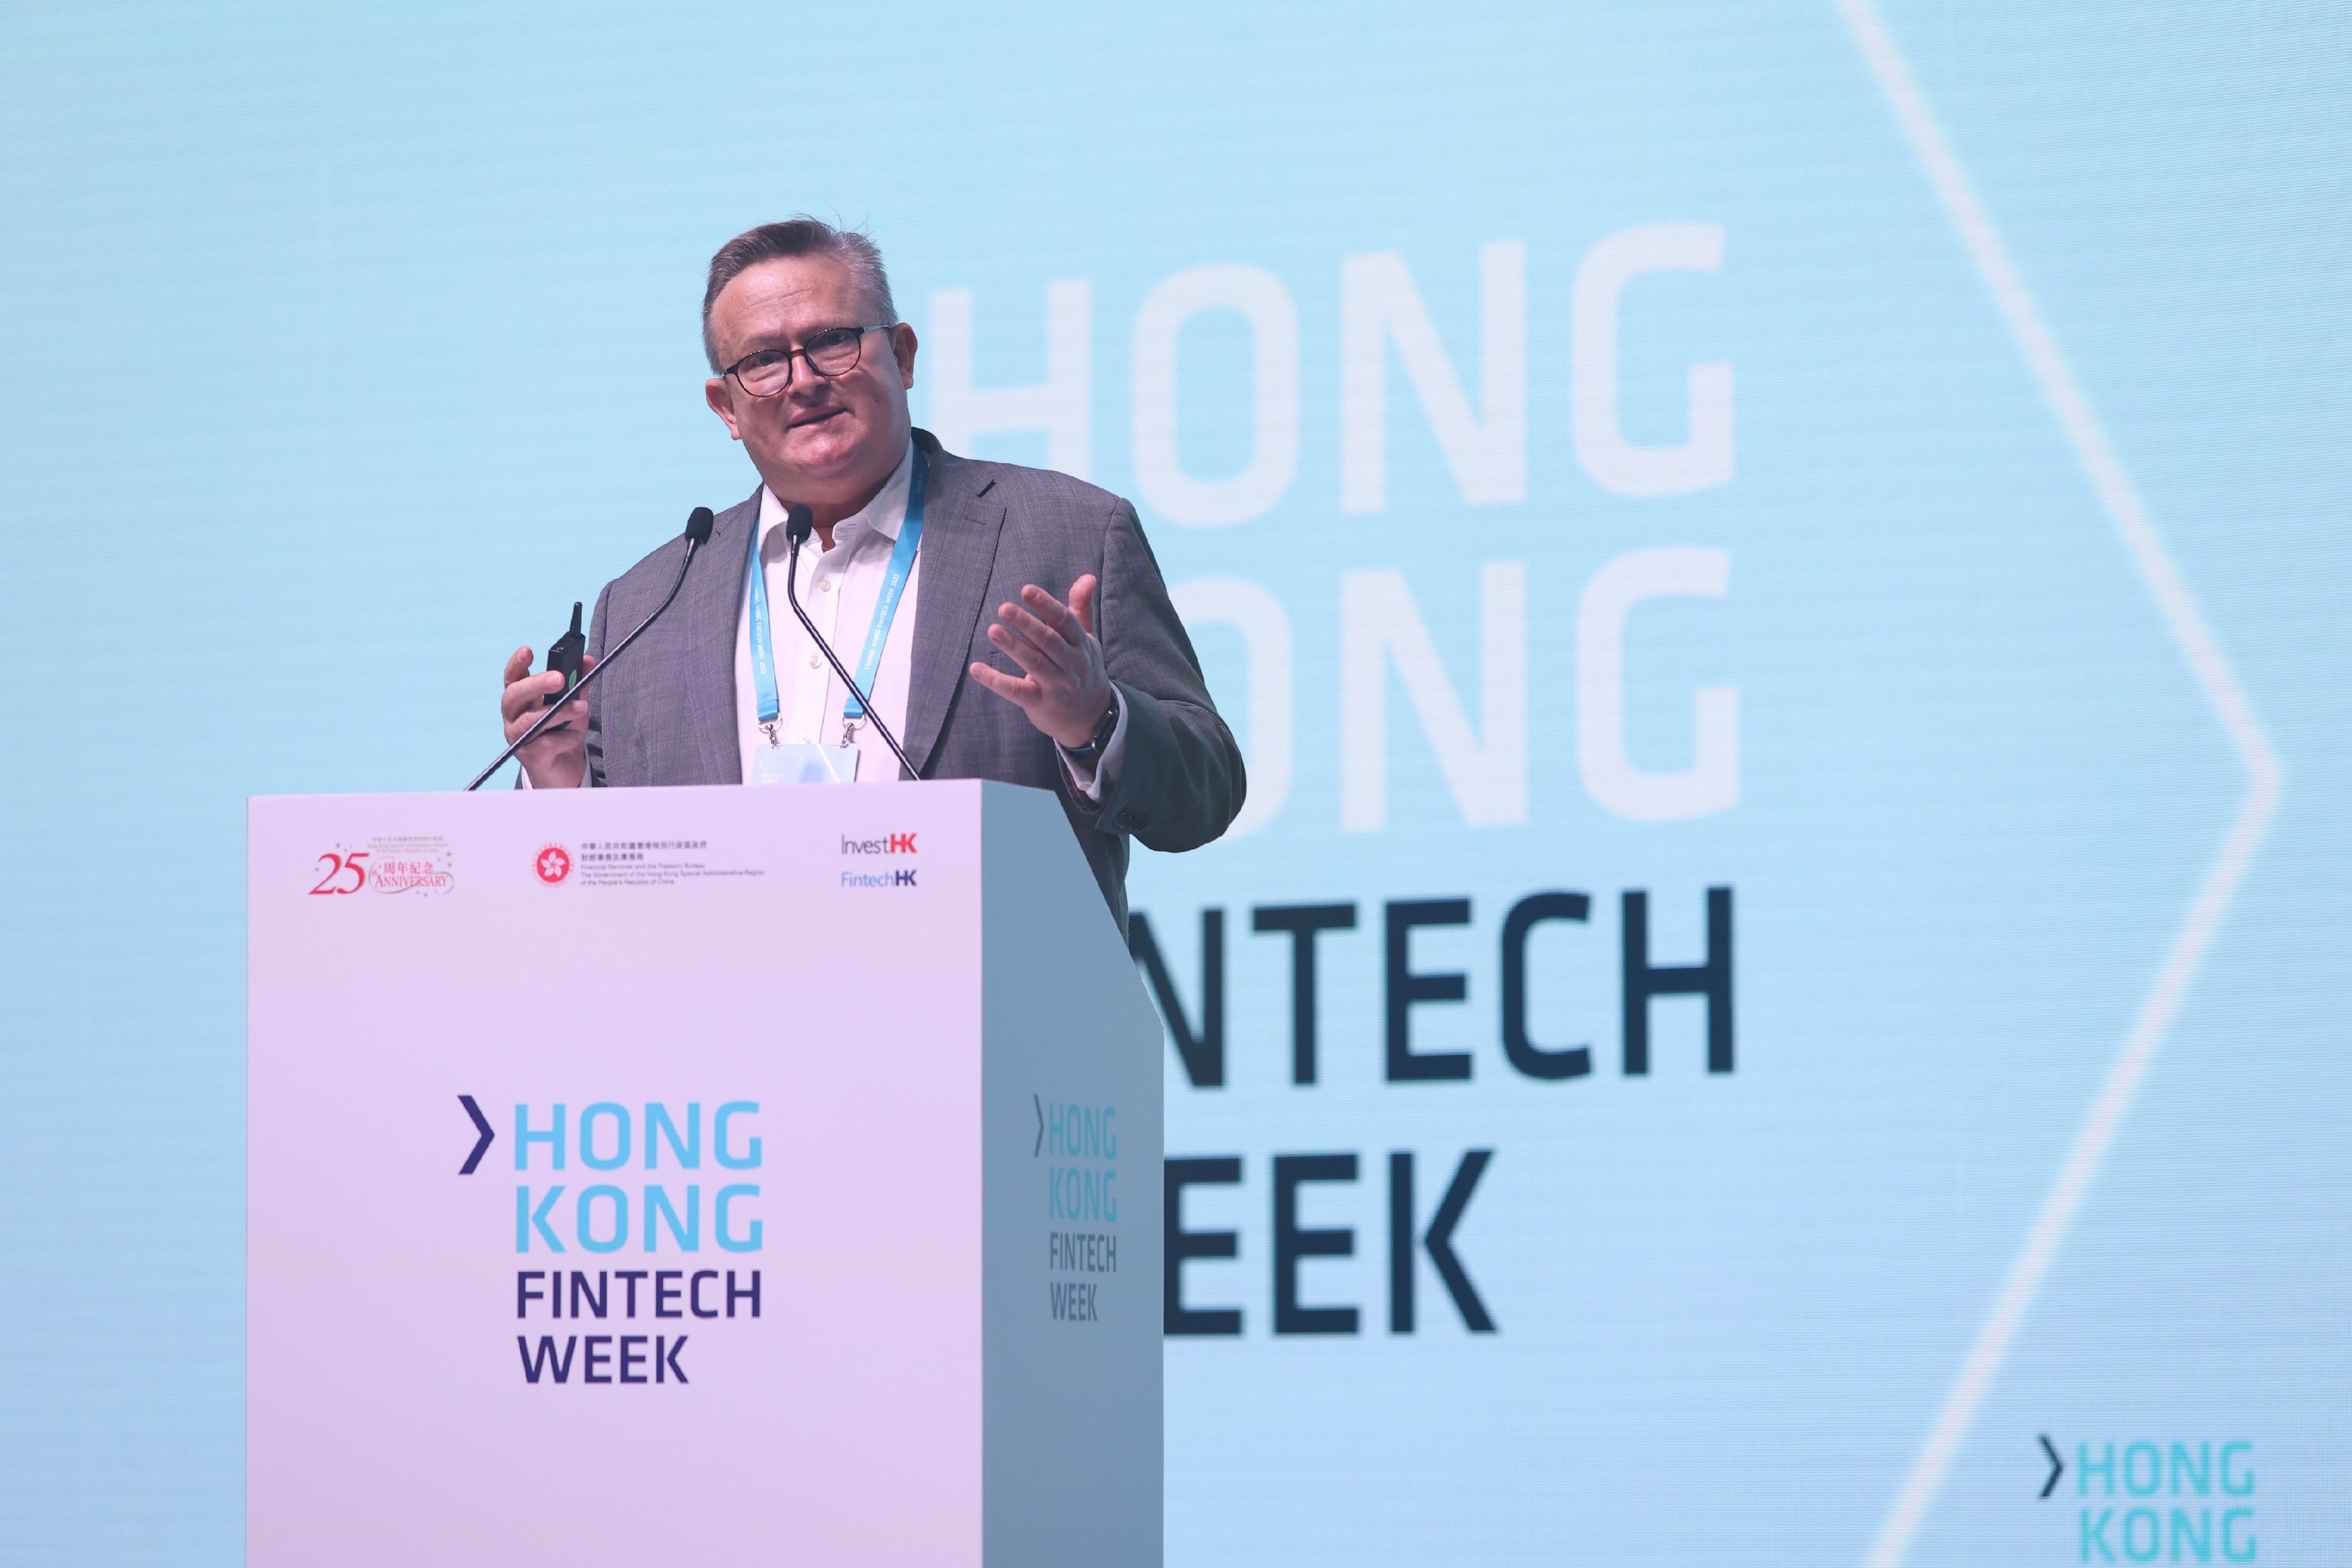 The five-day Hong Kong FinTech Week 2022 attracted over 30 000 visitors and more than five million online views from over 95 economies. Photo shows the Director-General of Investment Promotion of Invest Hong Kong, Mr Stephen Phillips, presenting the latest development of the Hong Kong fintech ecosystem on October 31.